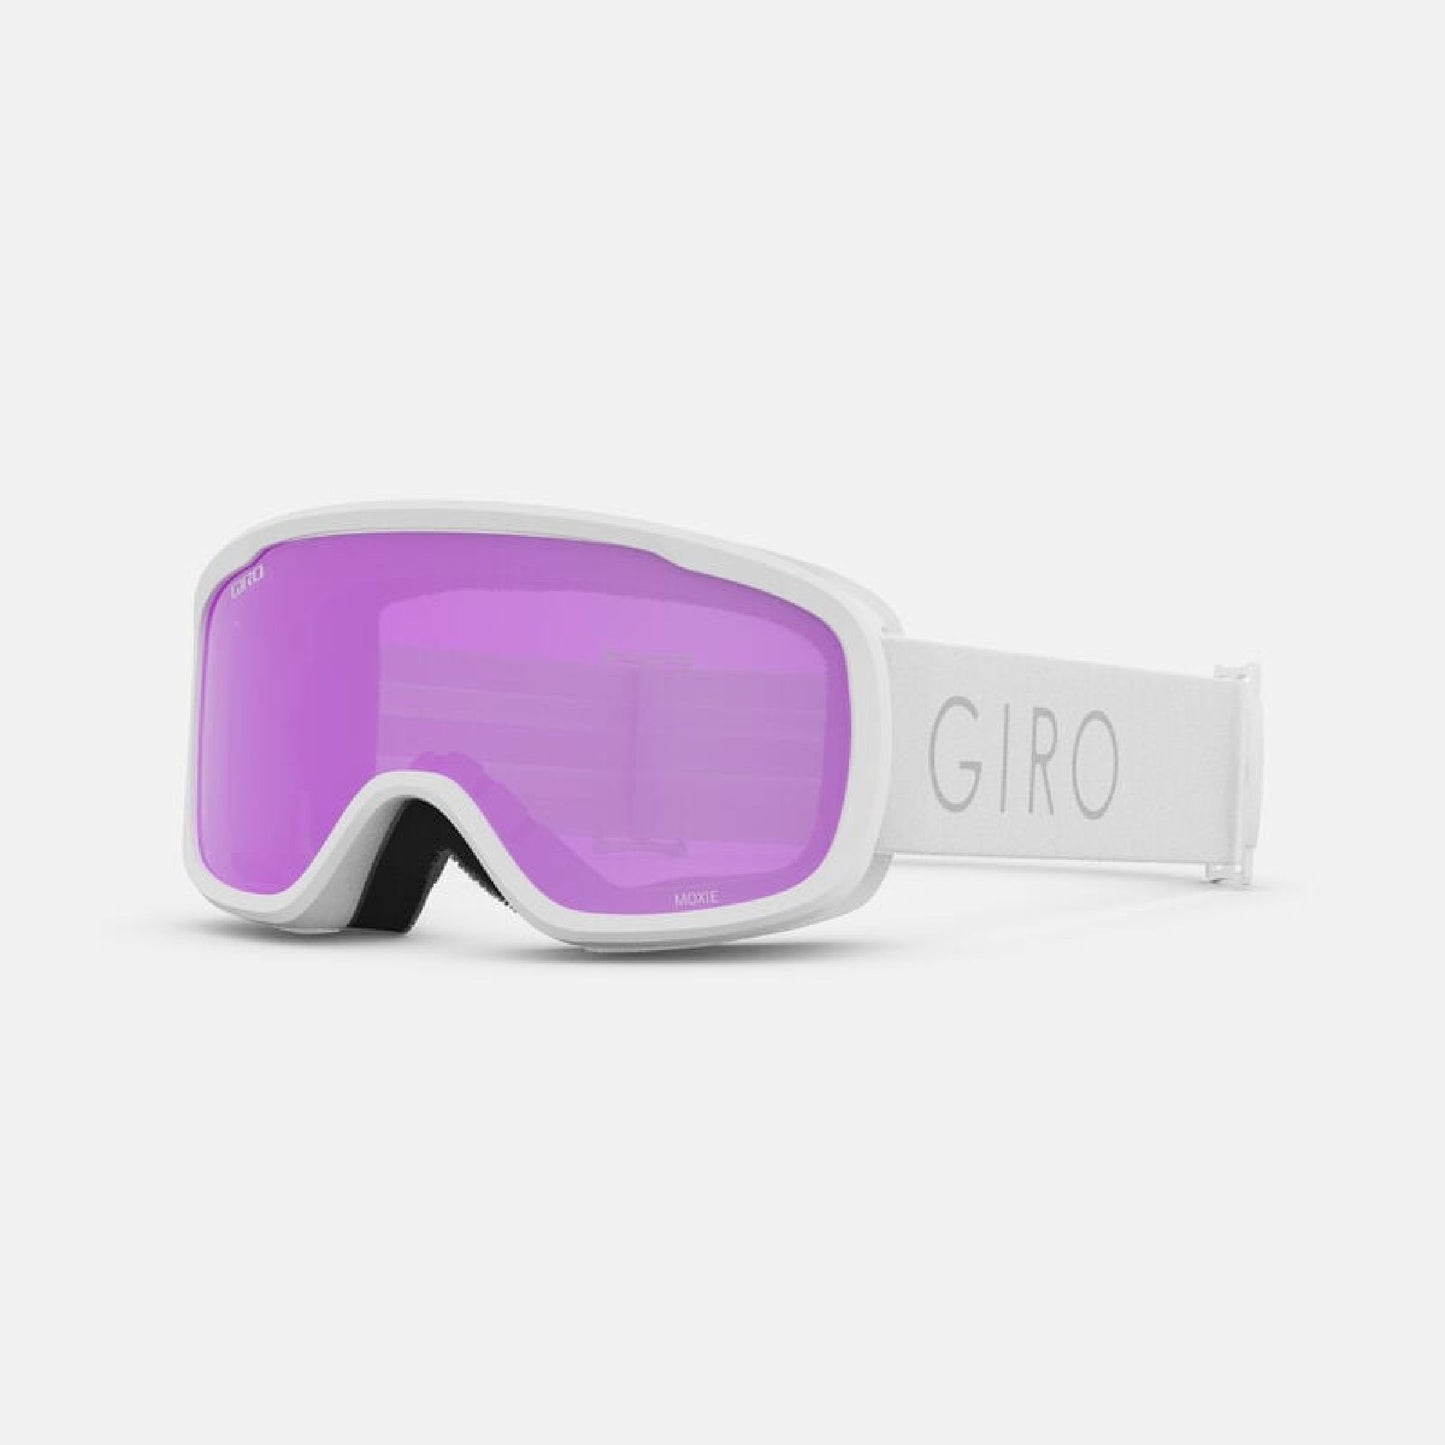 Giro Women's Moxie AF Snow Goggles White Core LIght Amber Pink Snow Goggles